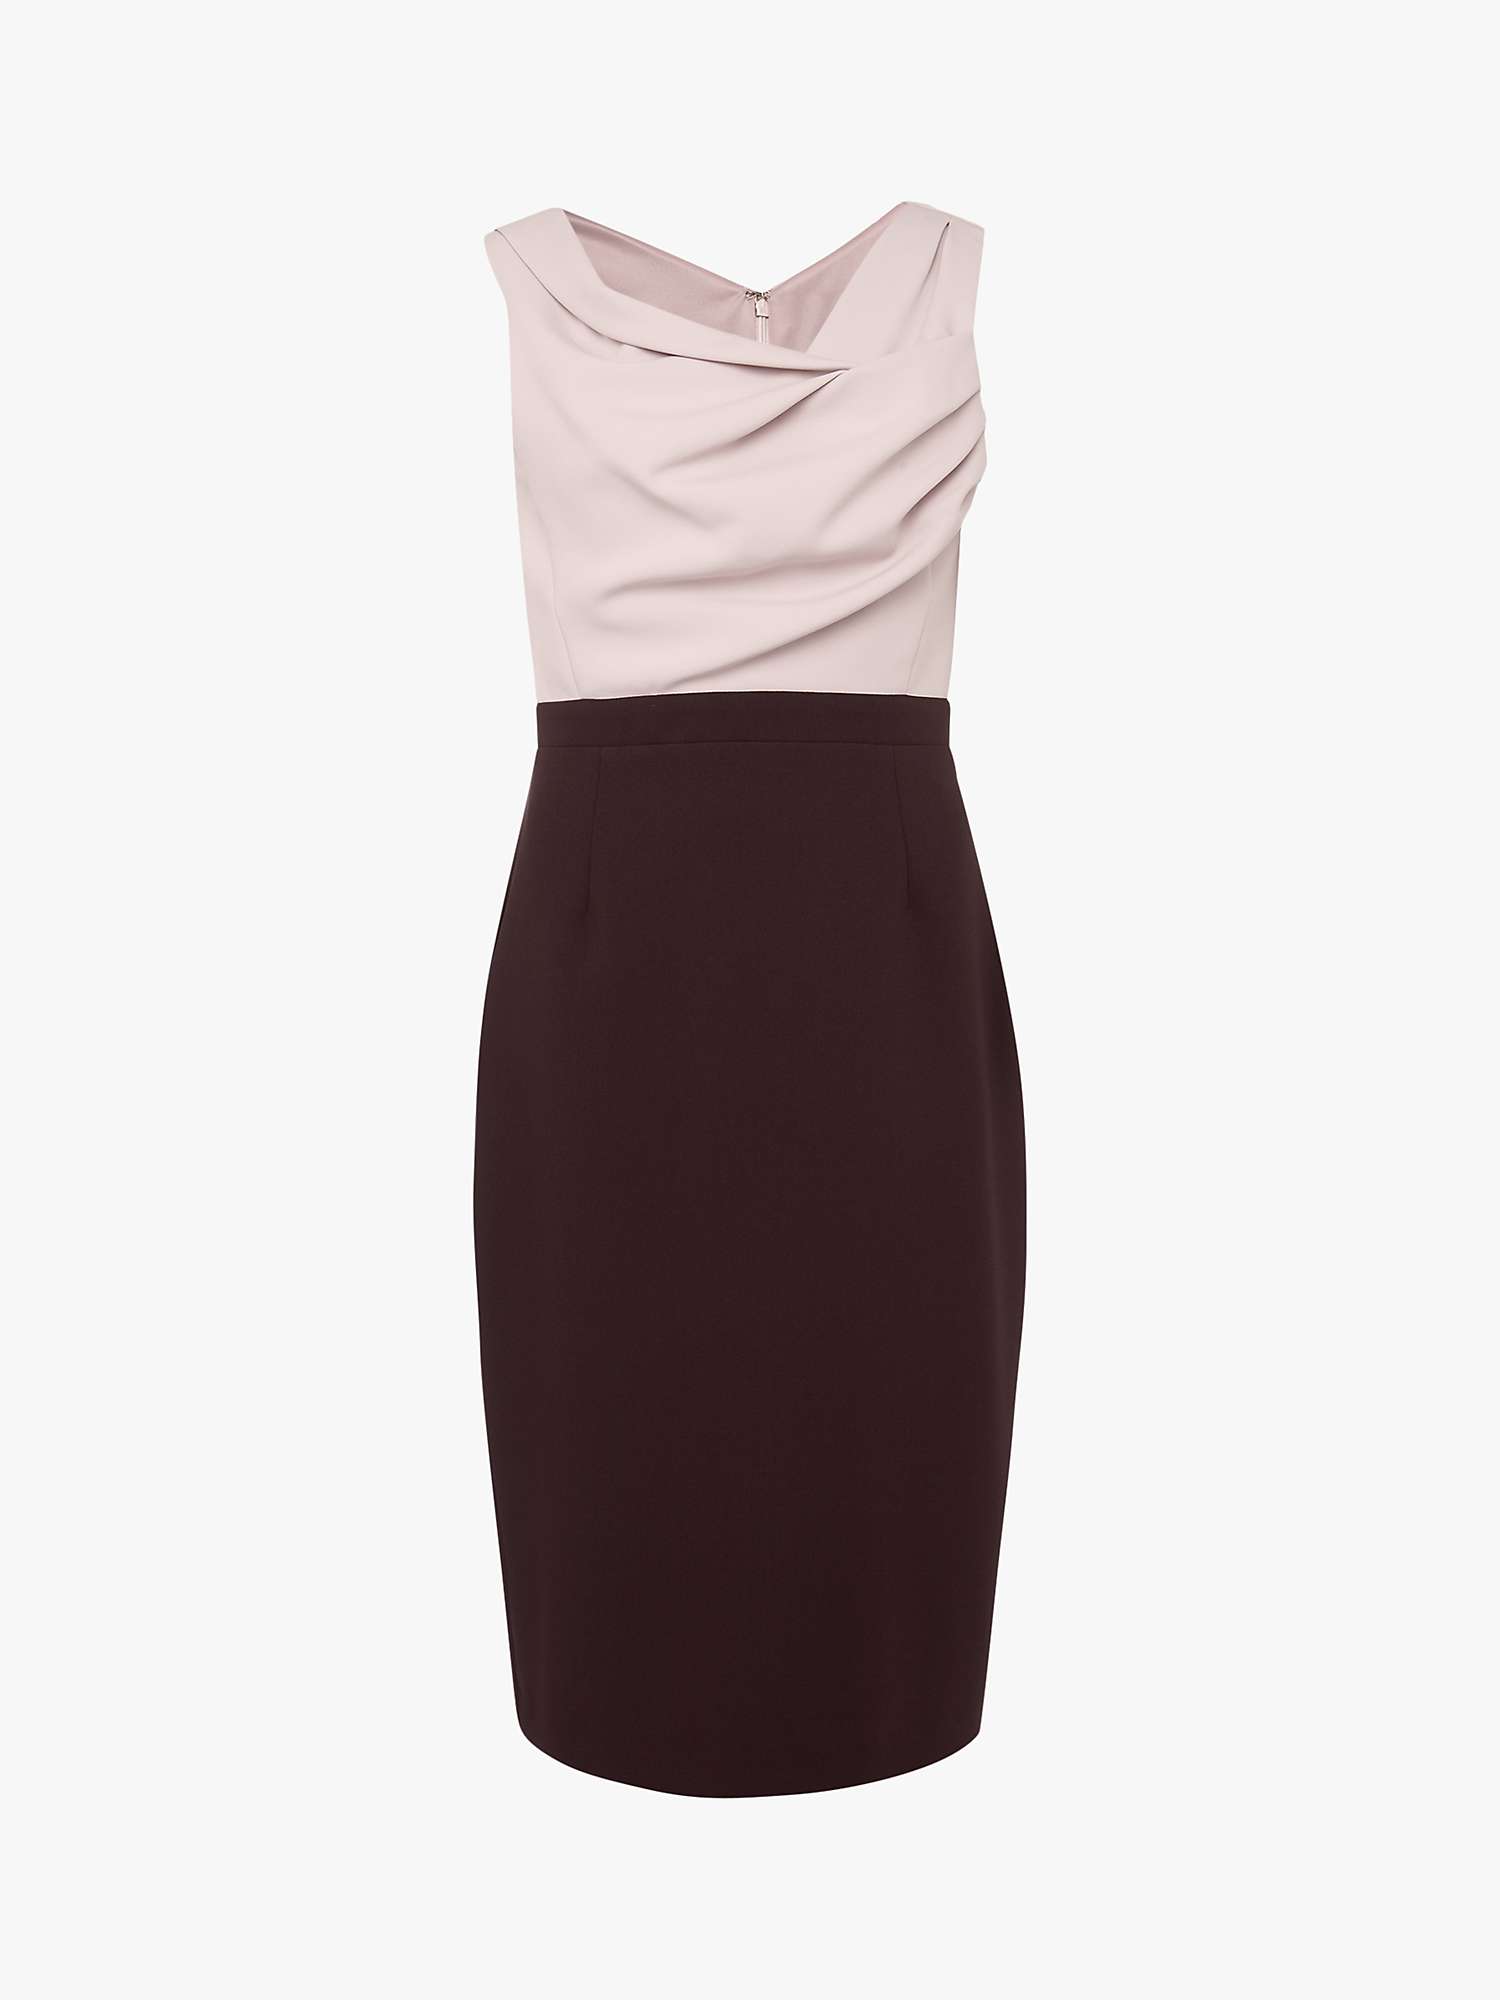 Buy Phase Eight Tandy Dress, Antique Rose/Wine Online at johnlewis.com